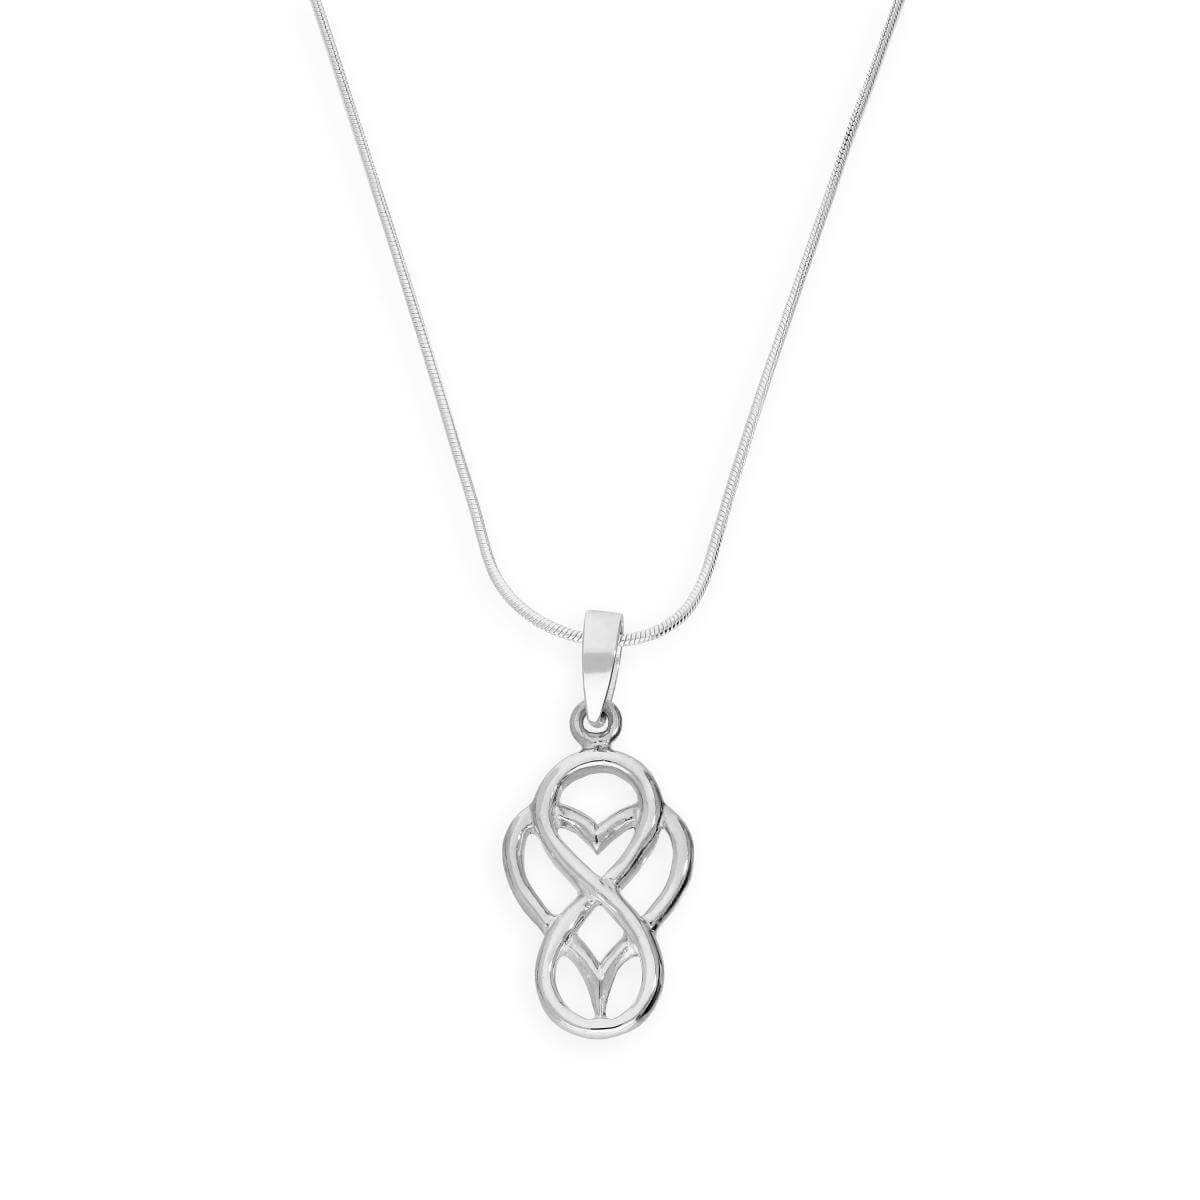 Sterling Silver Infinity Heart Symbol Pendant Necklace 14 - 22 Inches